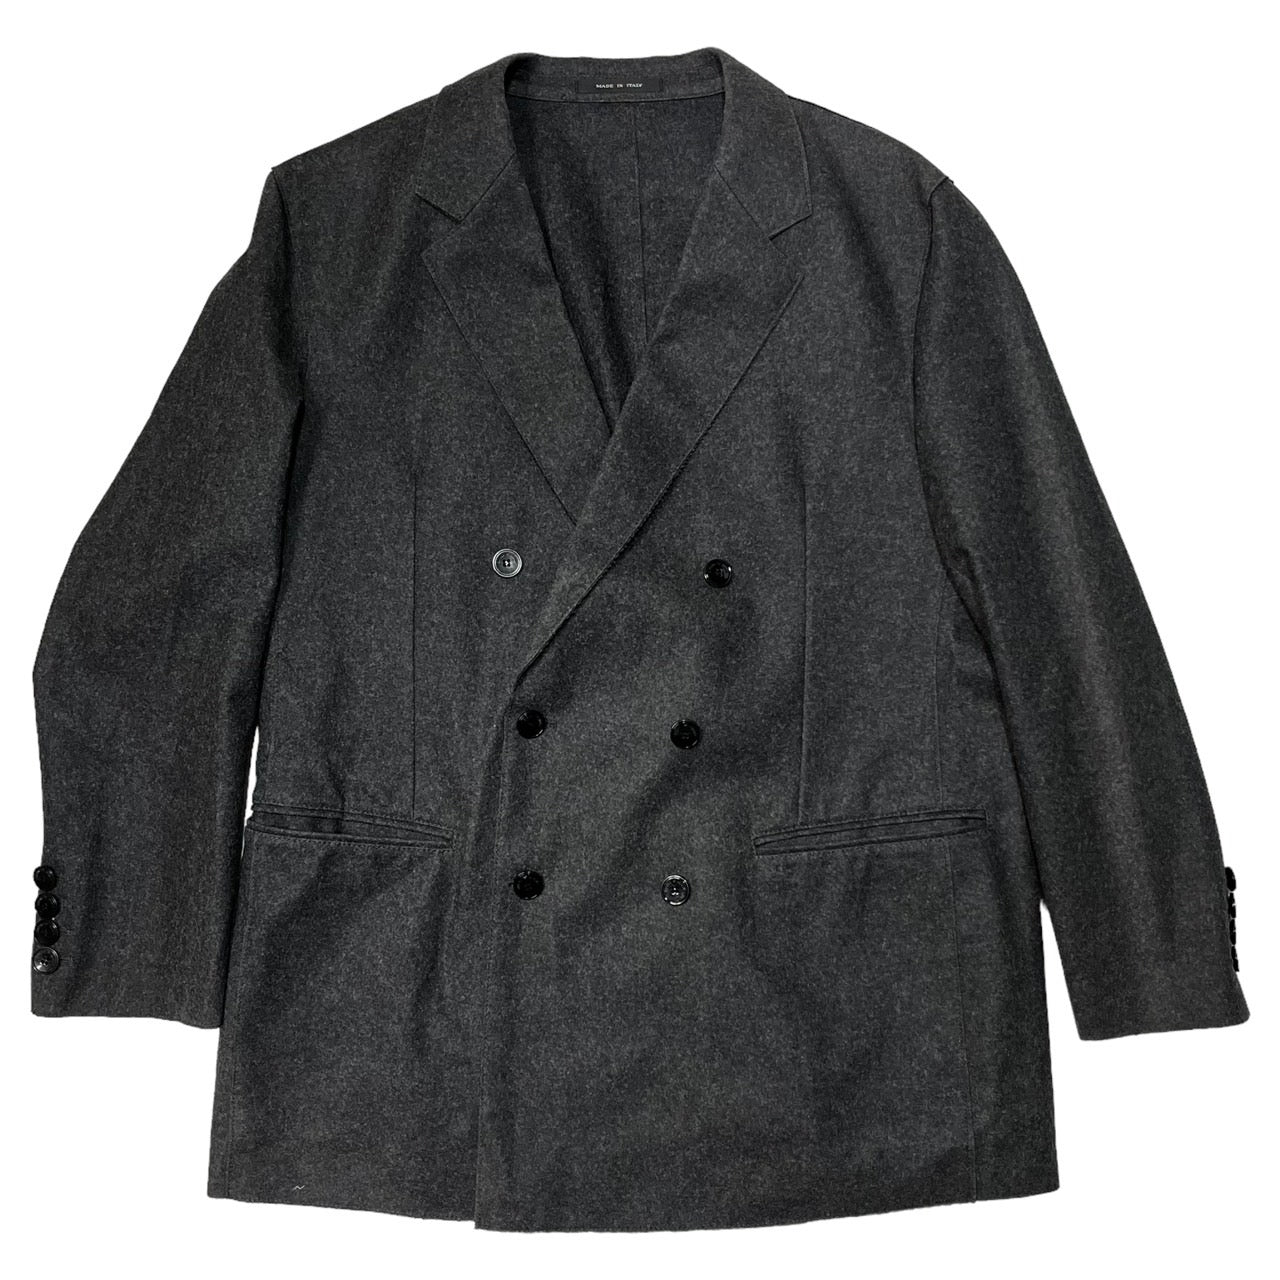 EMPORIO ARMANI(エンポリオアルマーニ) wool double-breasted jacket ...